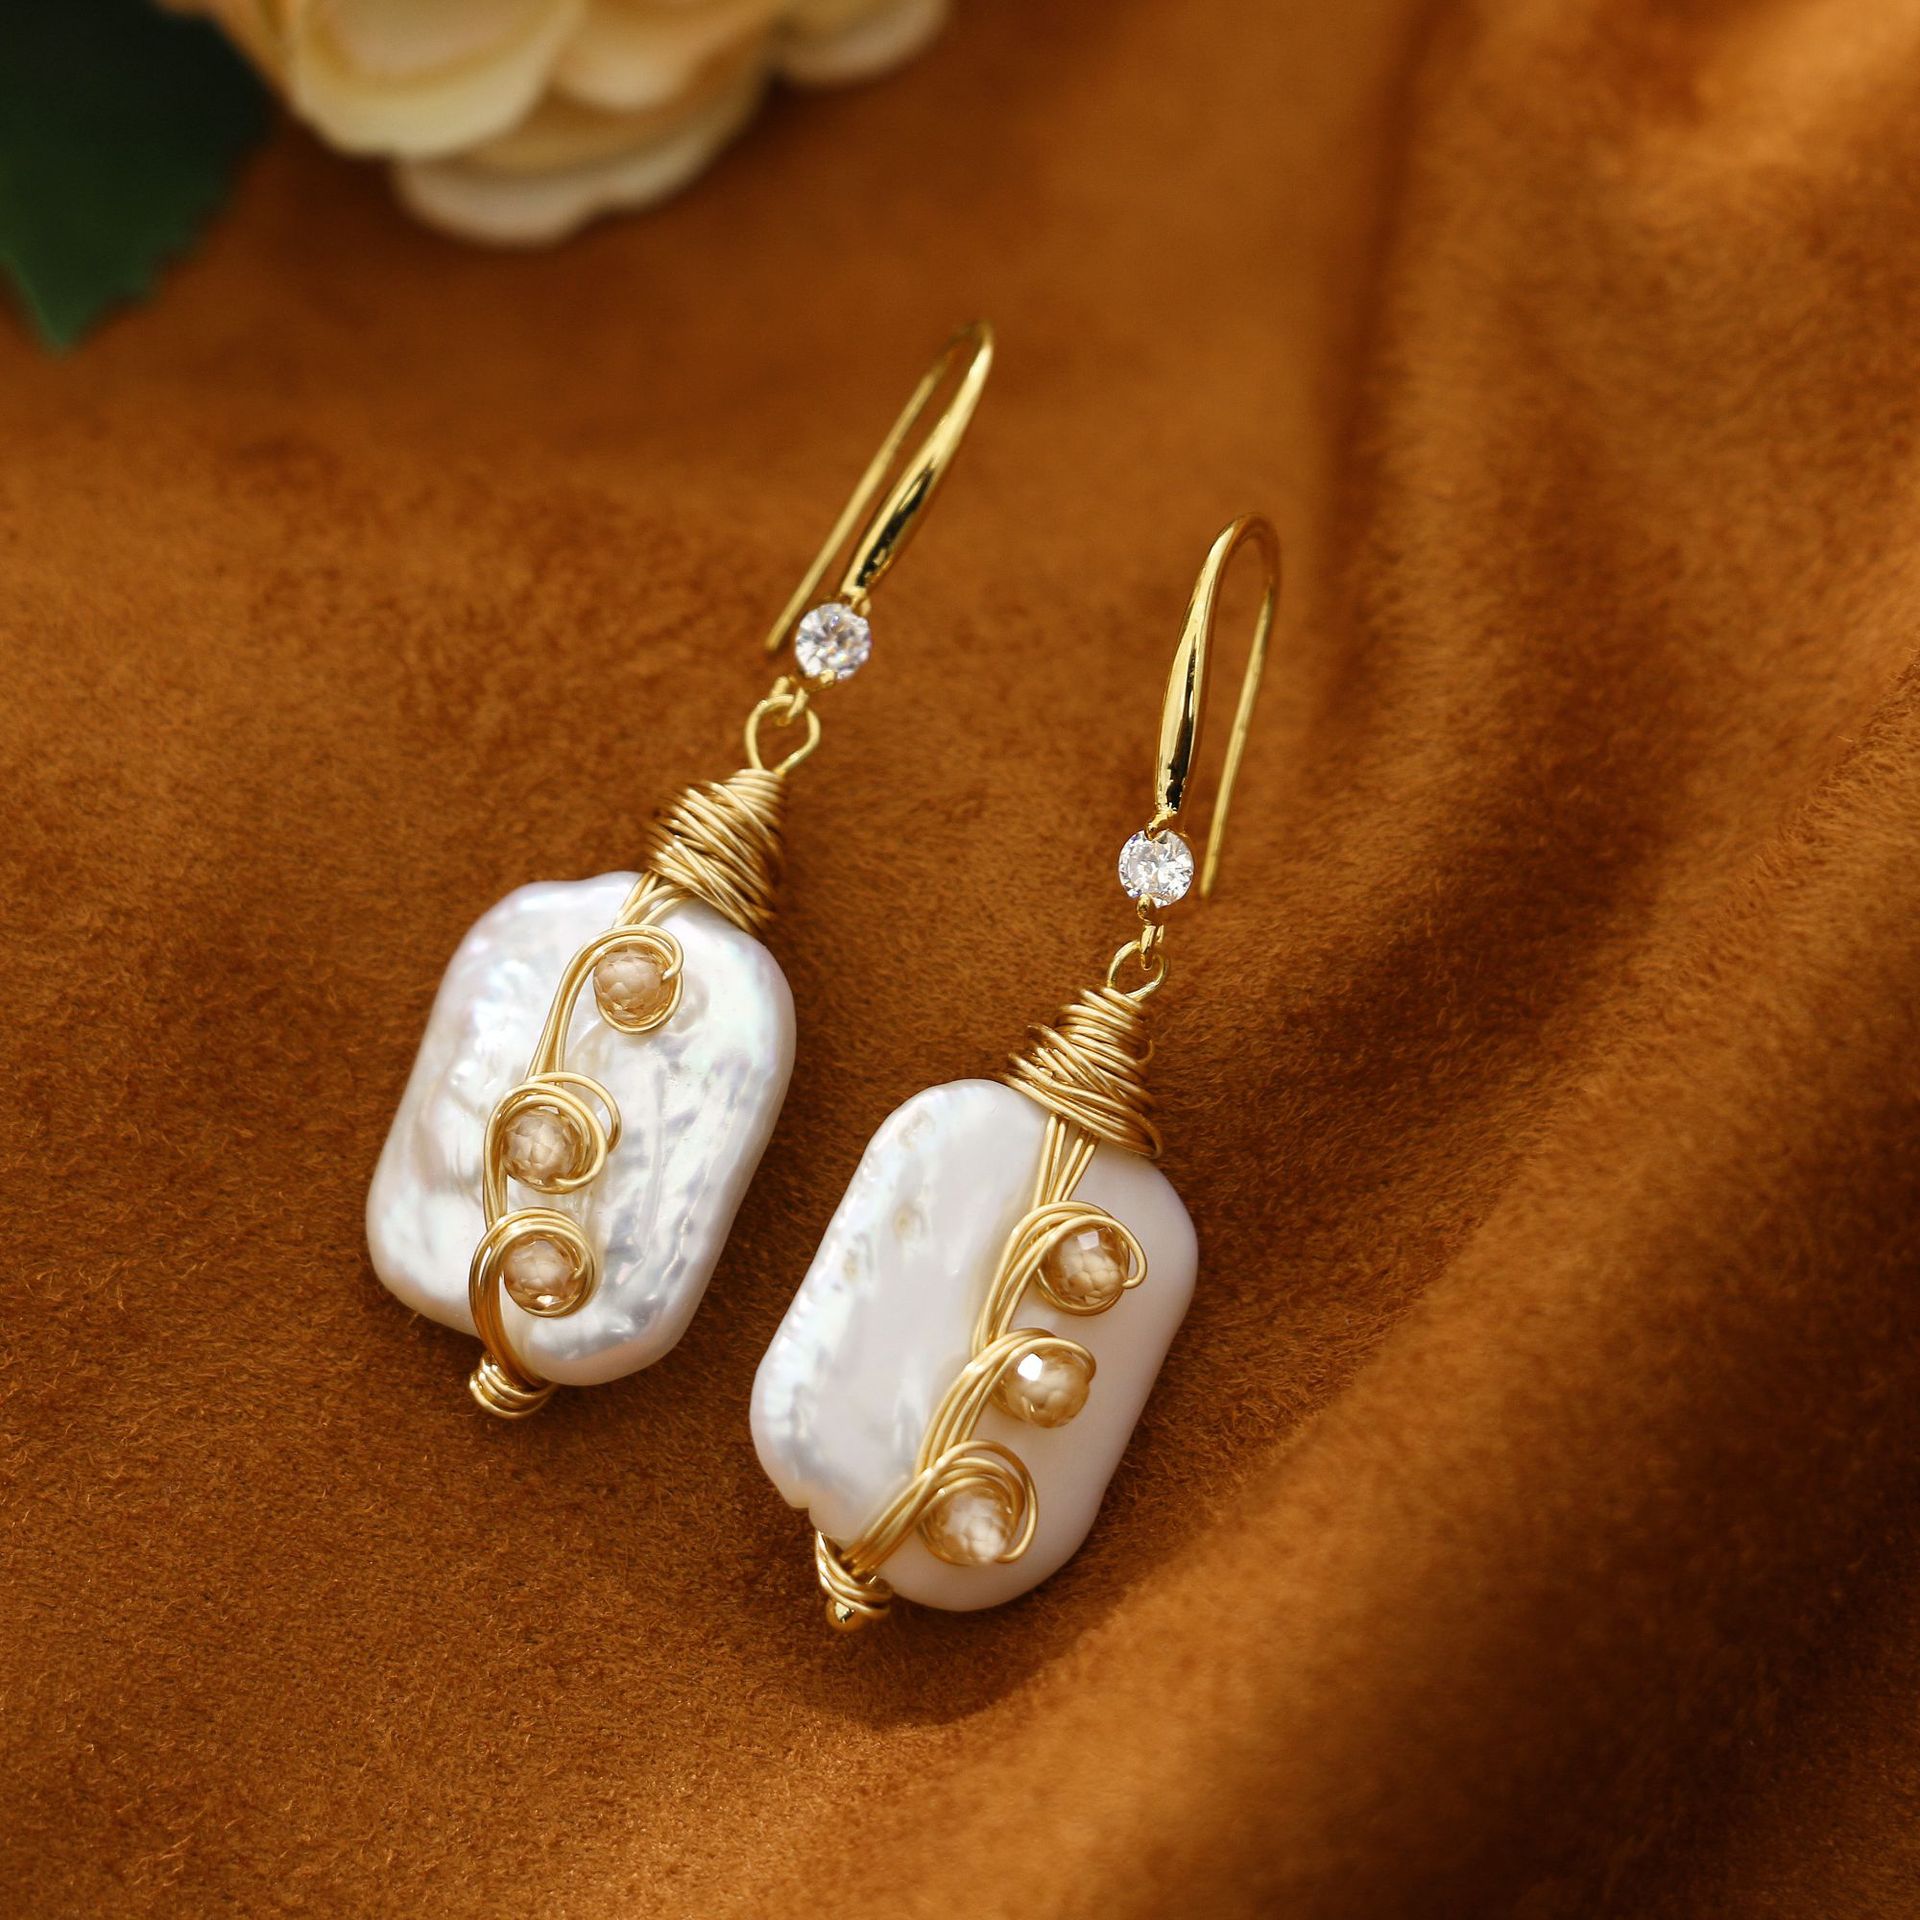 Zircon Crystal Winding Baroque Fresh Water Pearl Earrings Retro High Sense Temperament Entry Lux Autumn and Winter Special-Interest Earrings